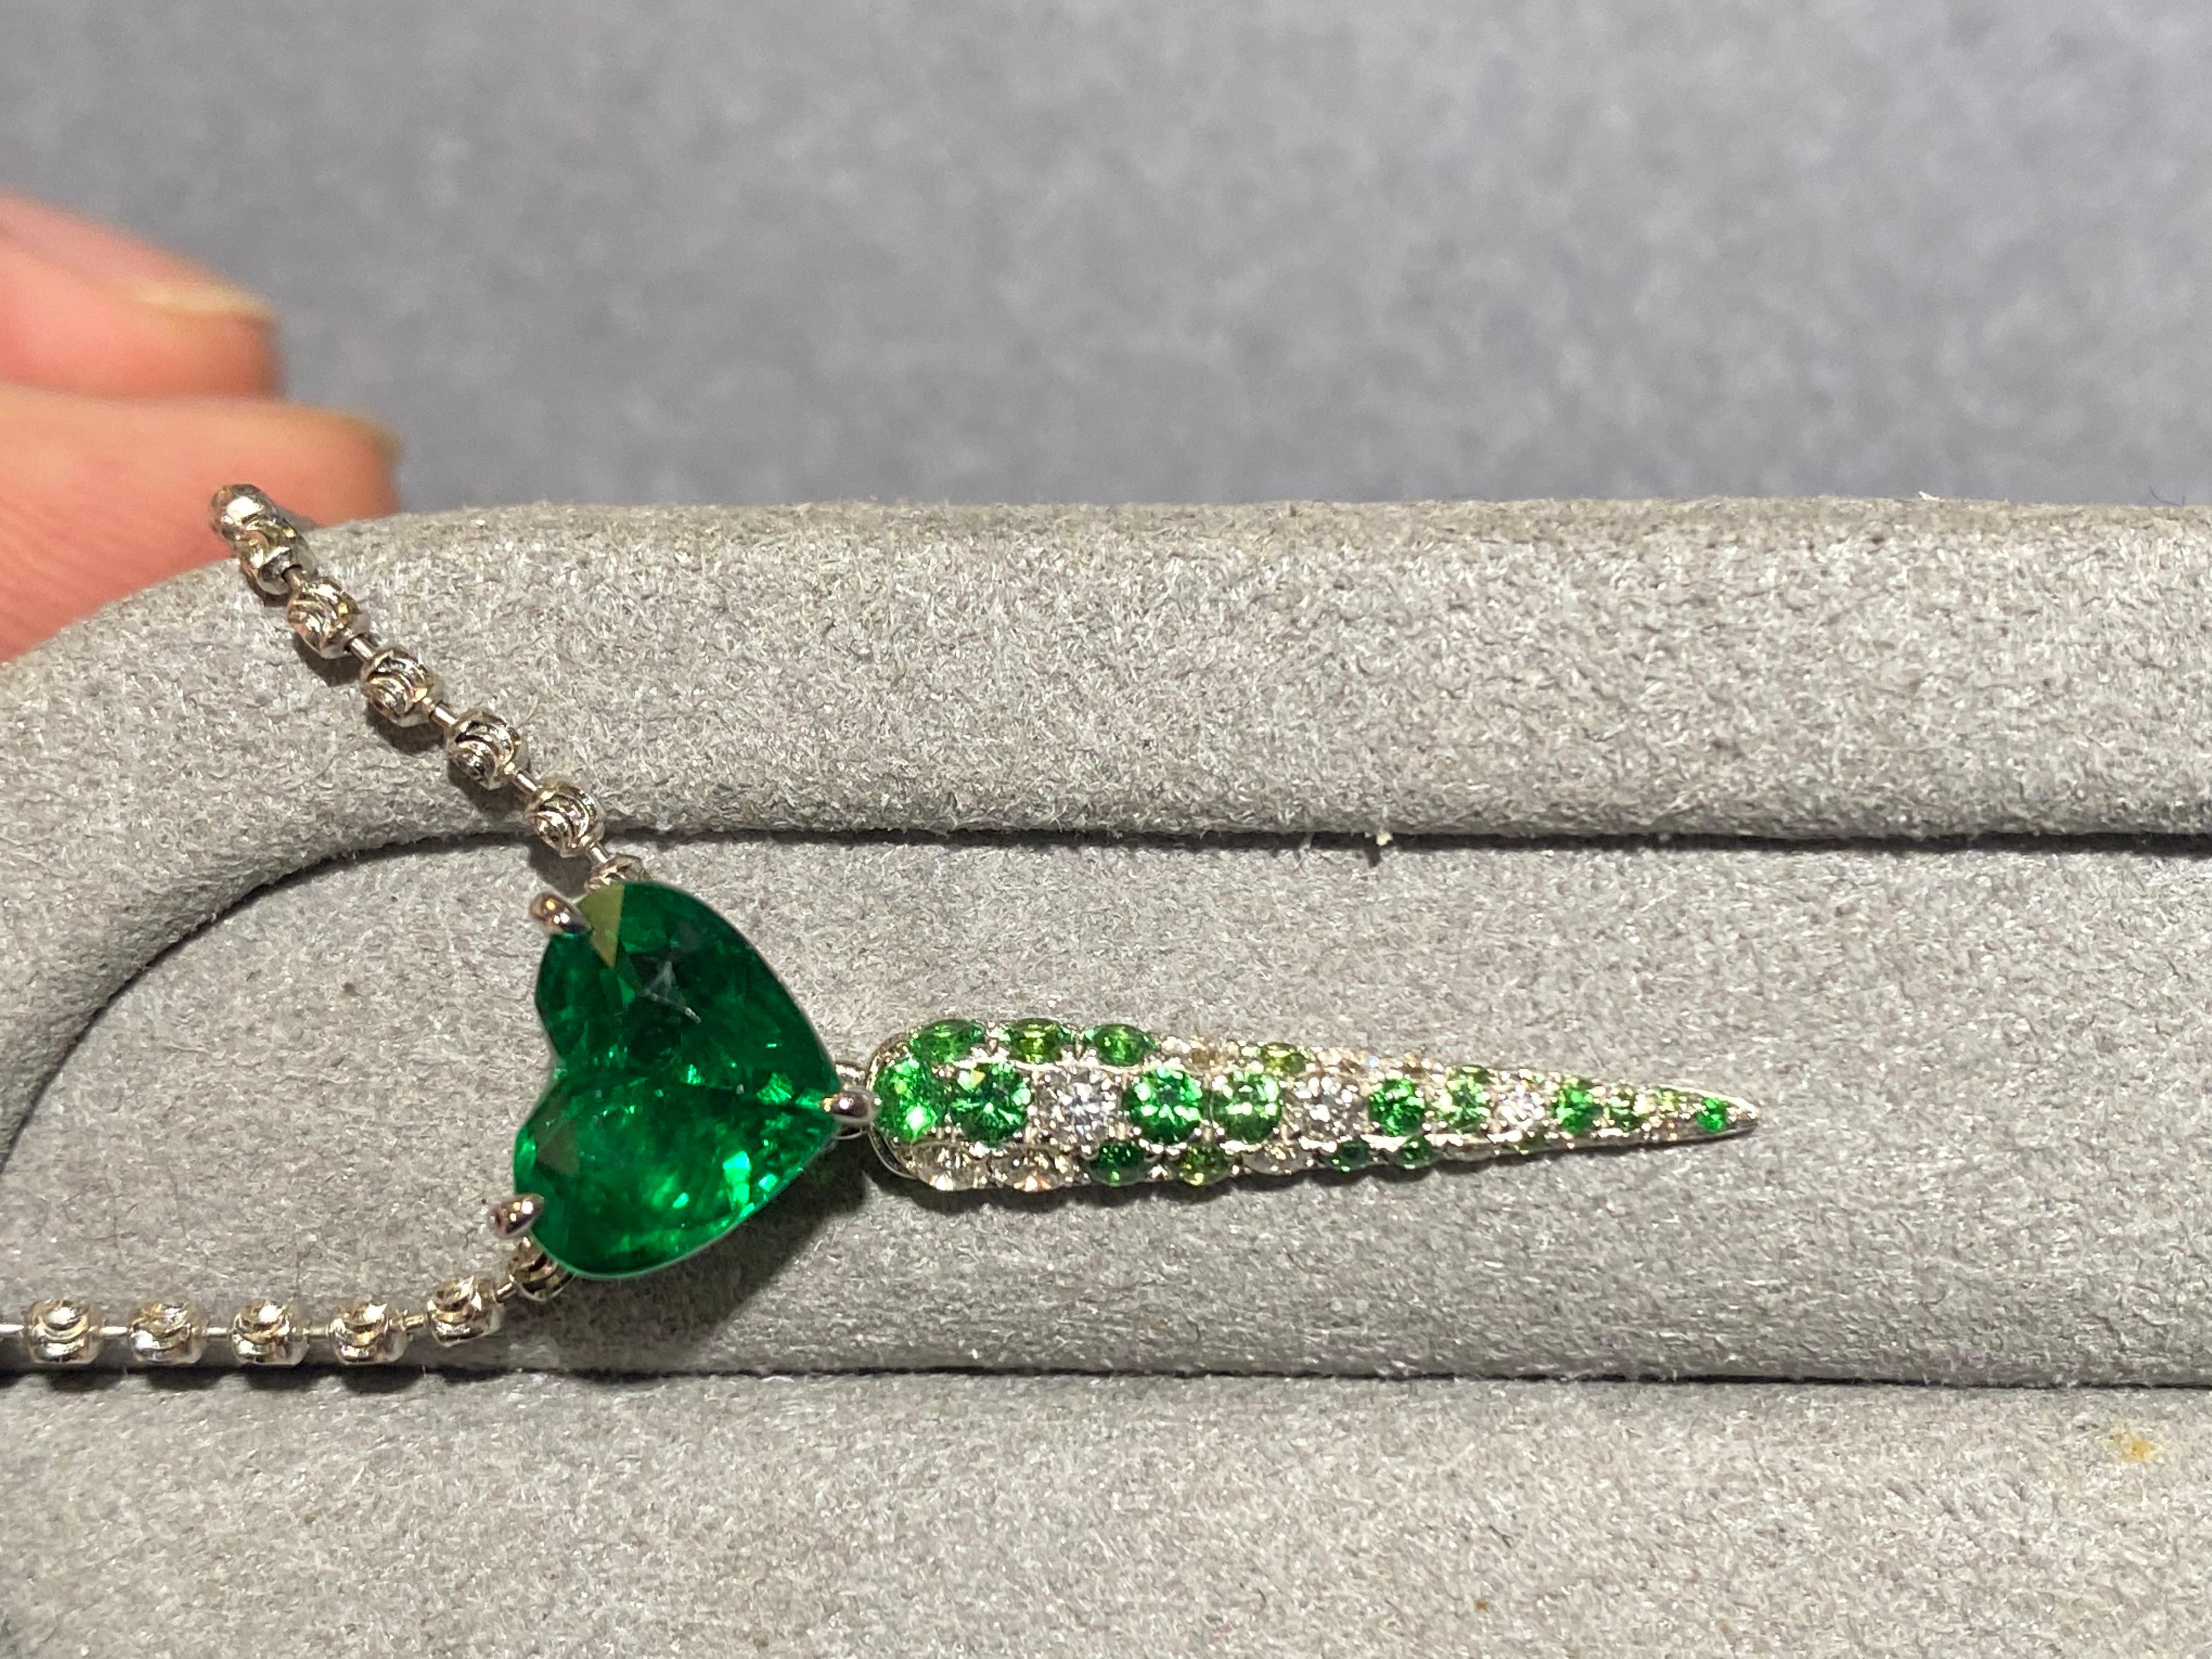 A heart shape Tsavorite garnet pendant in 18k white gold. Hanging below the heart shape Tsavorite garnet is an icicle-like drop set with micro tsavorite and diaond pave. The icicle can be removed so that the pendant becomes a simpler heart shape